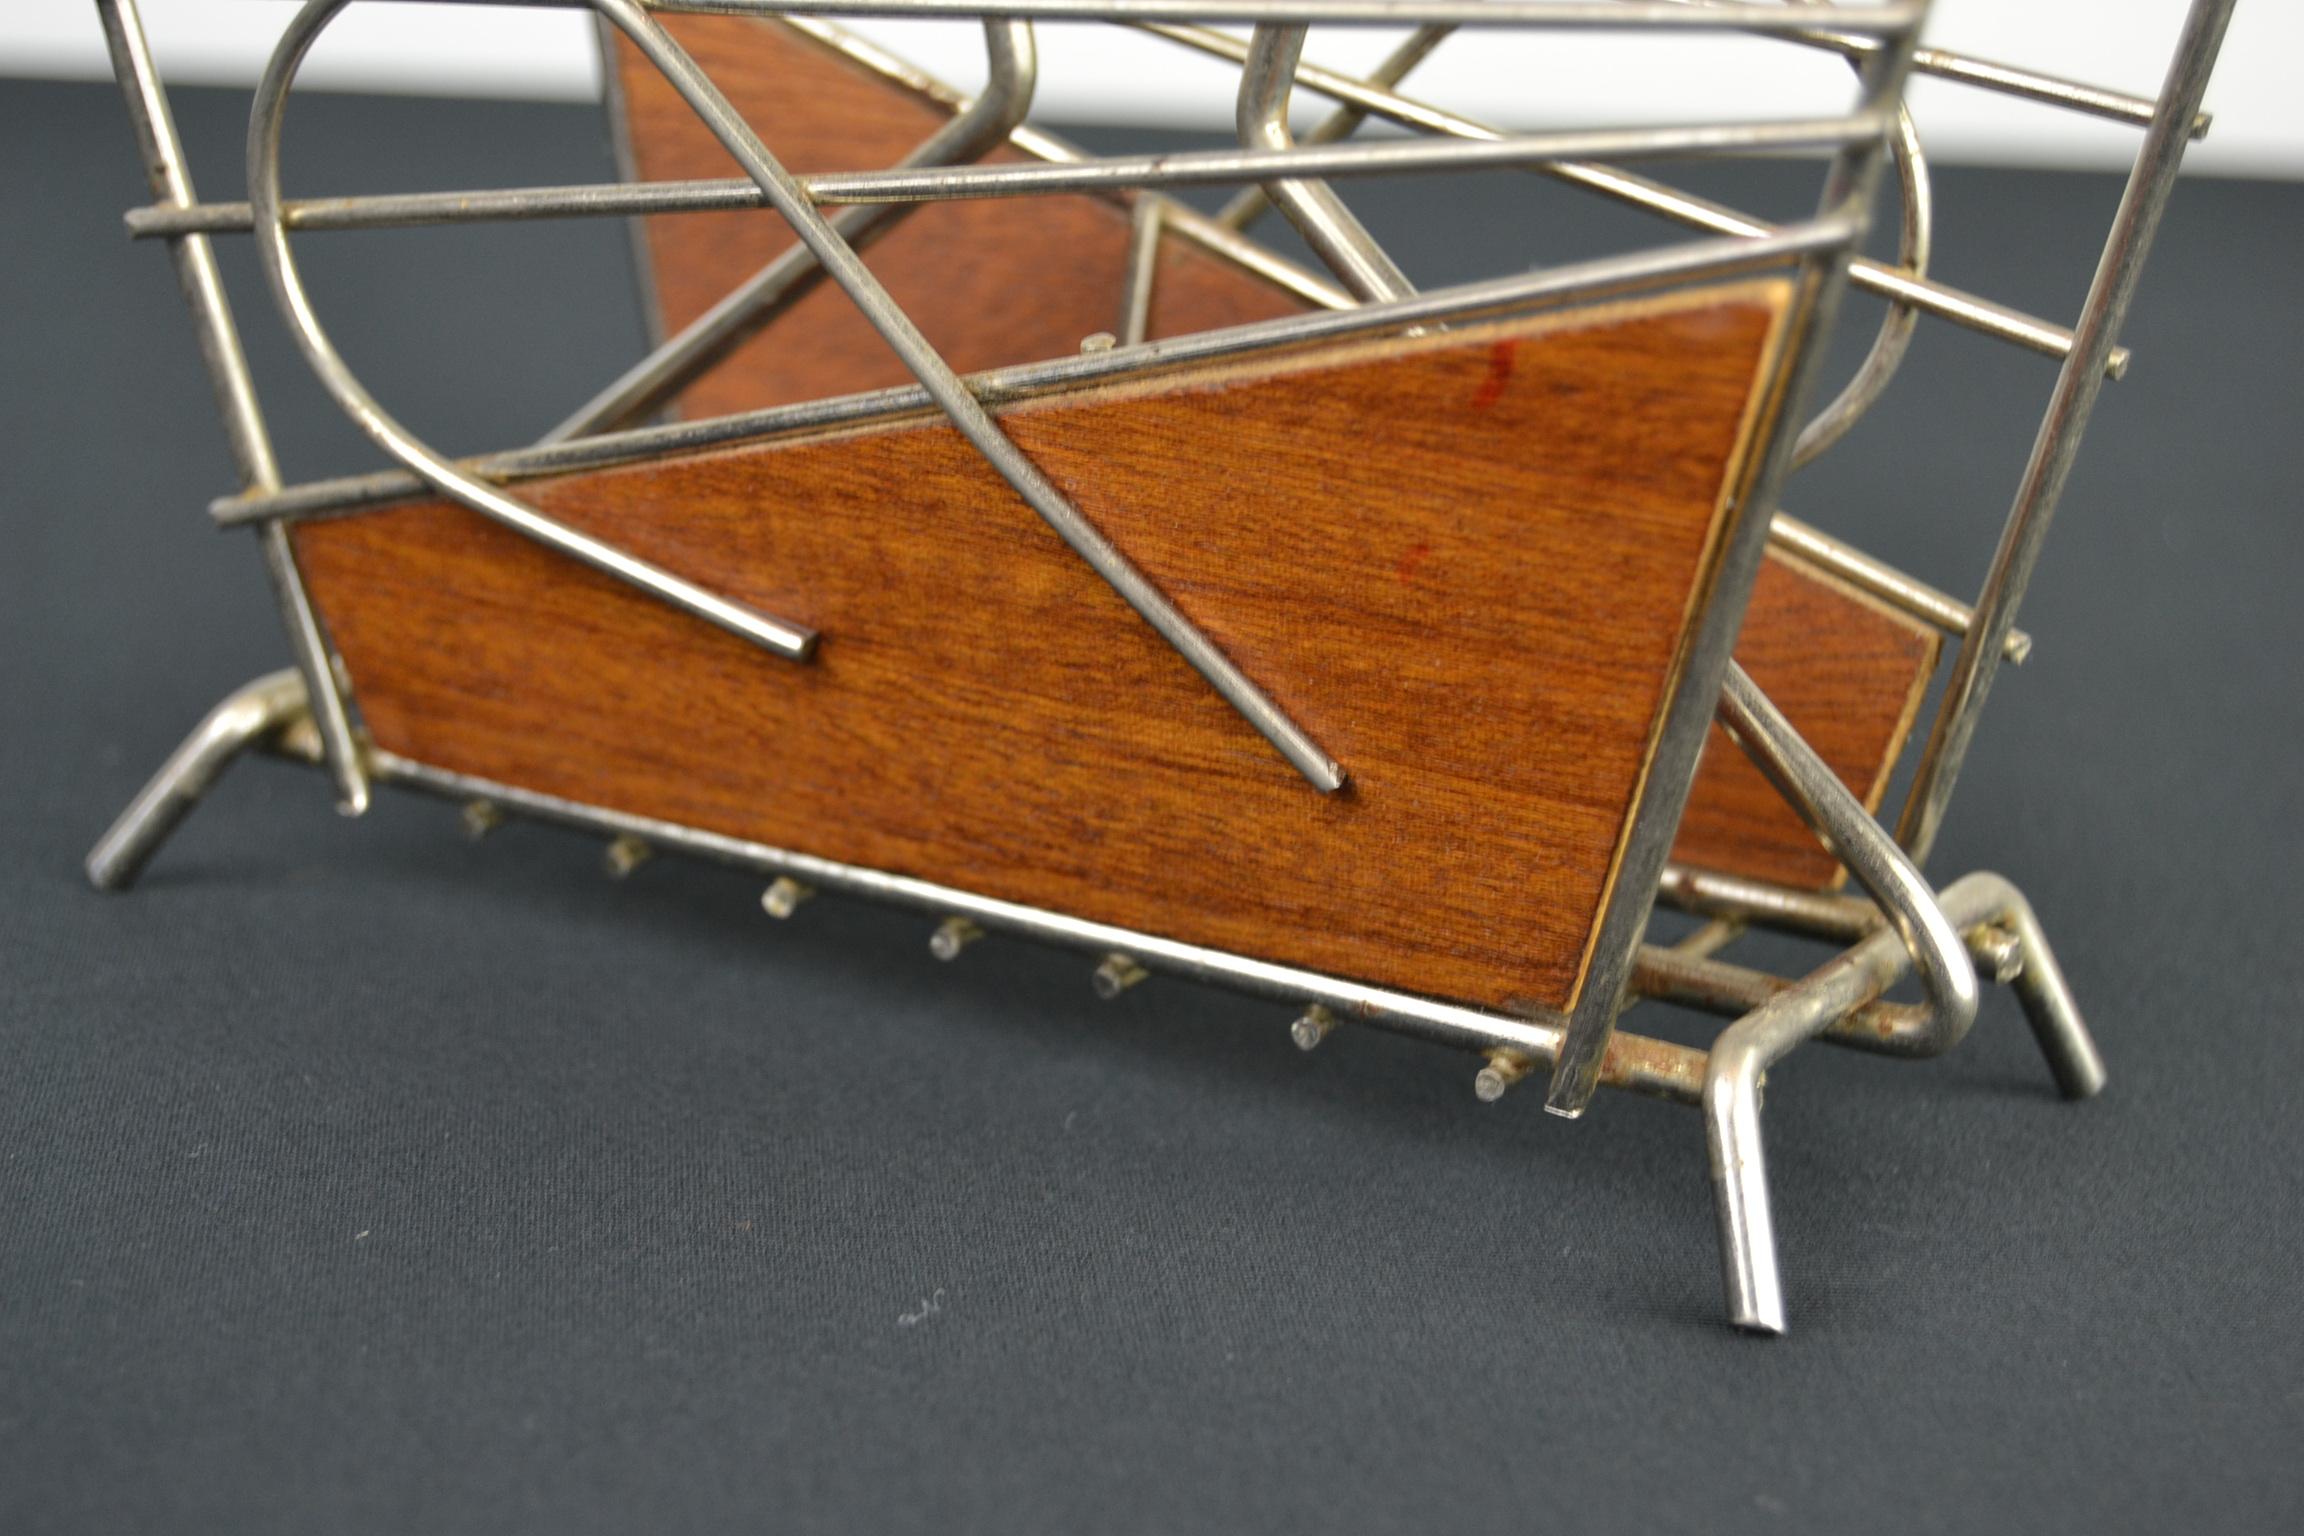 Vintage Letter Holder, Napkin Holder of Metal with Wood In Good Condition For Sale In Antwerp, BE